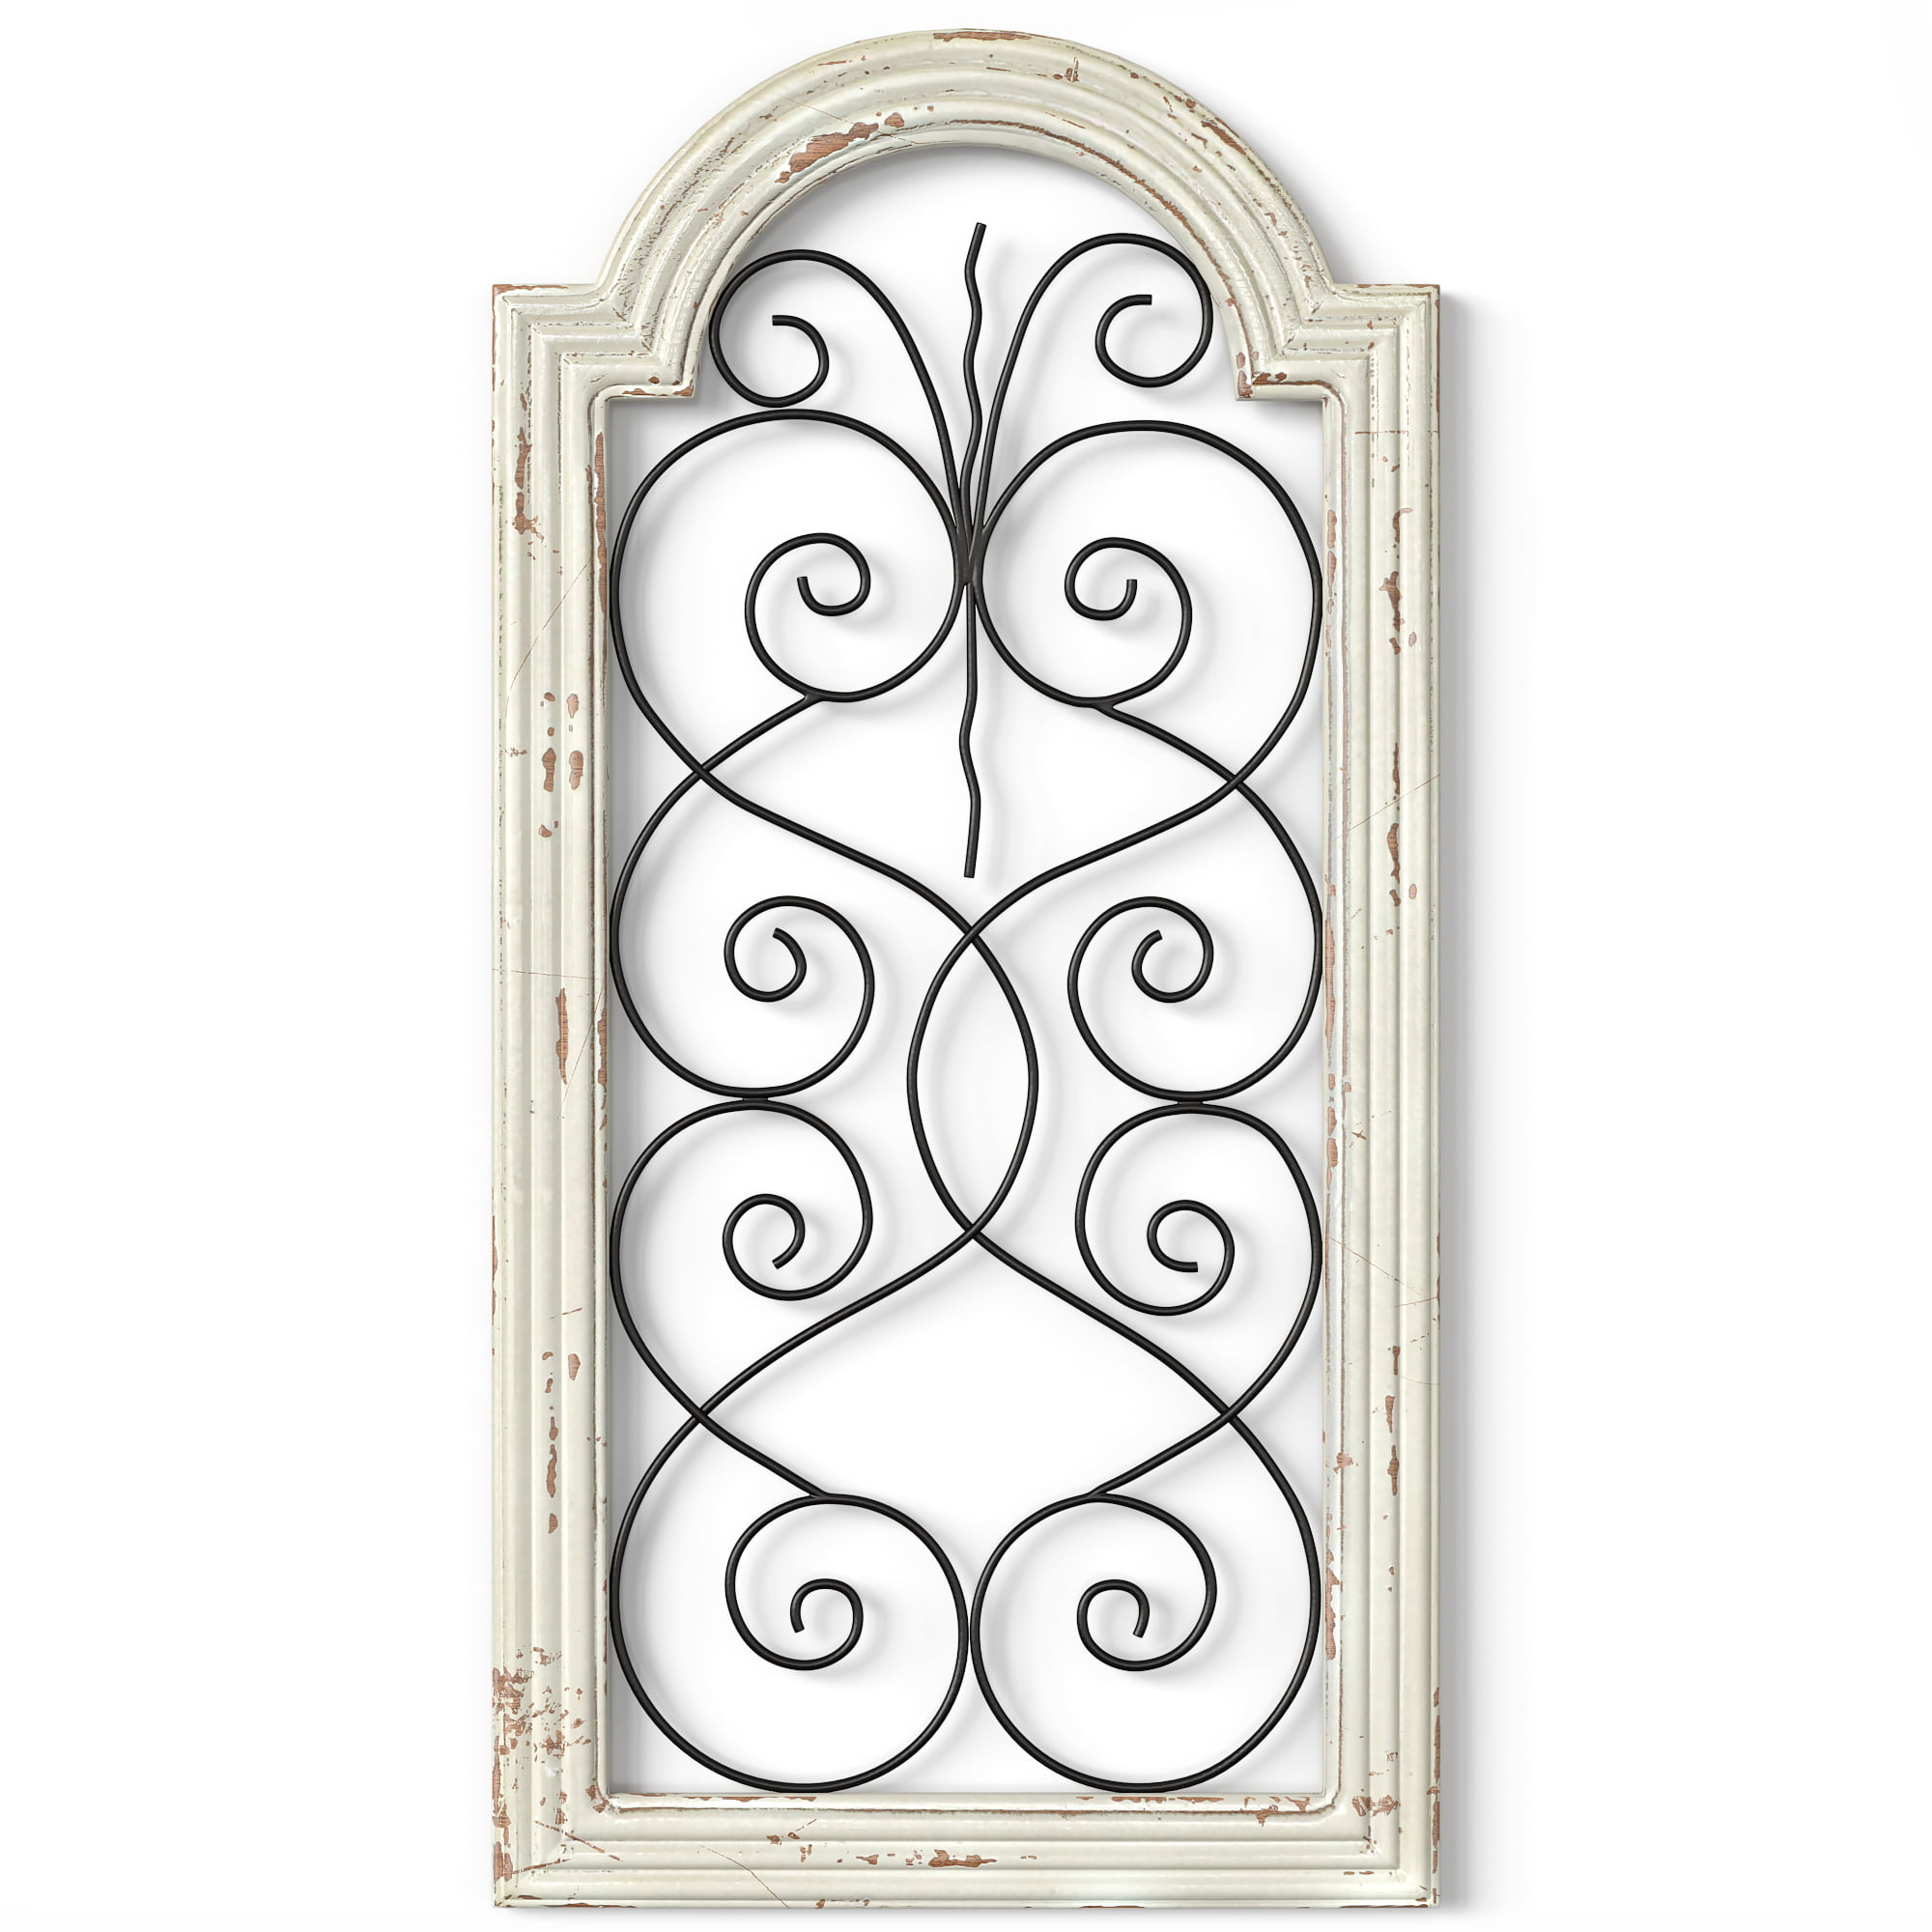 Classic Scroll Wrought Iron Metal Wall Decor Rustic Antique Indoor Outdoor 